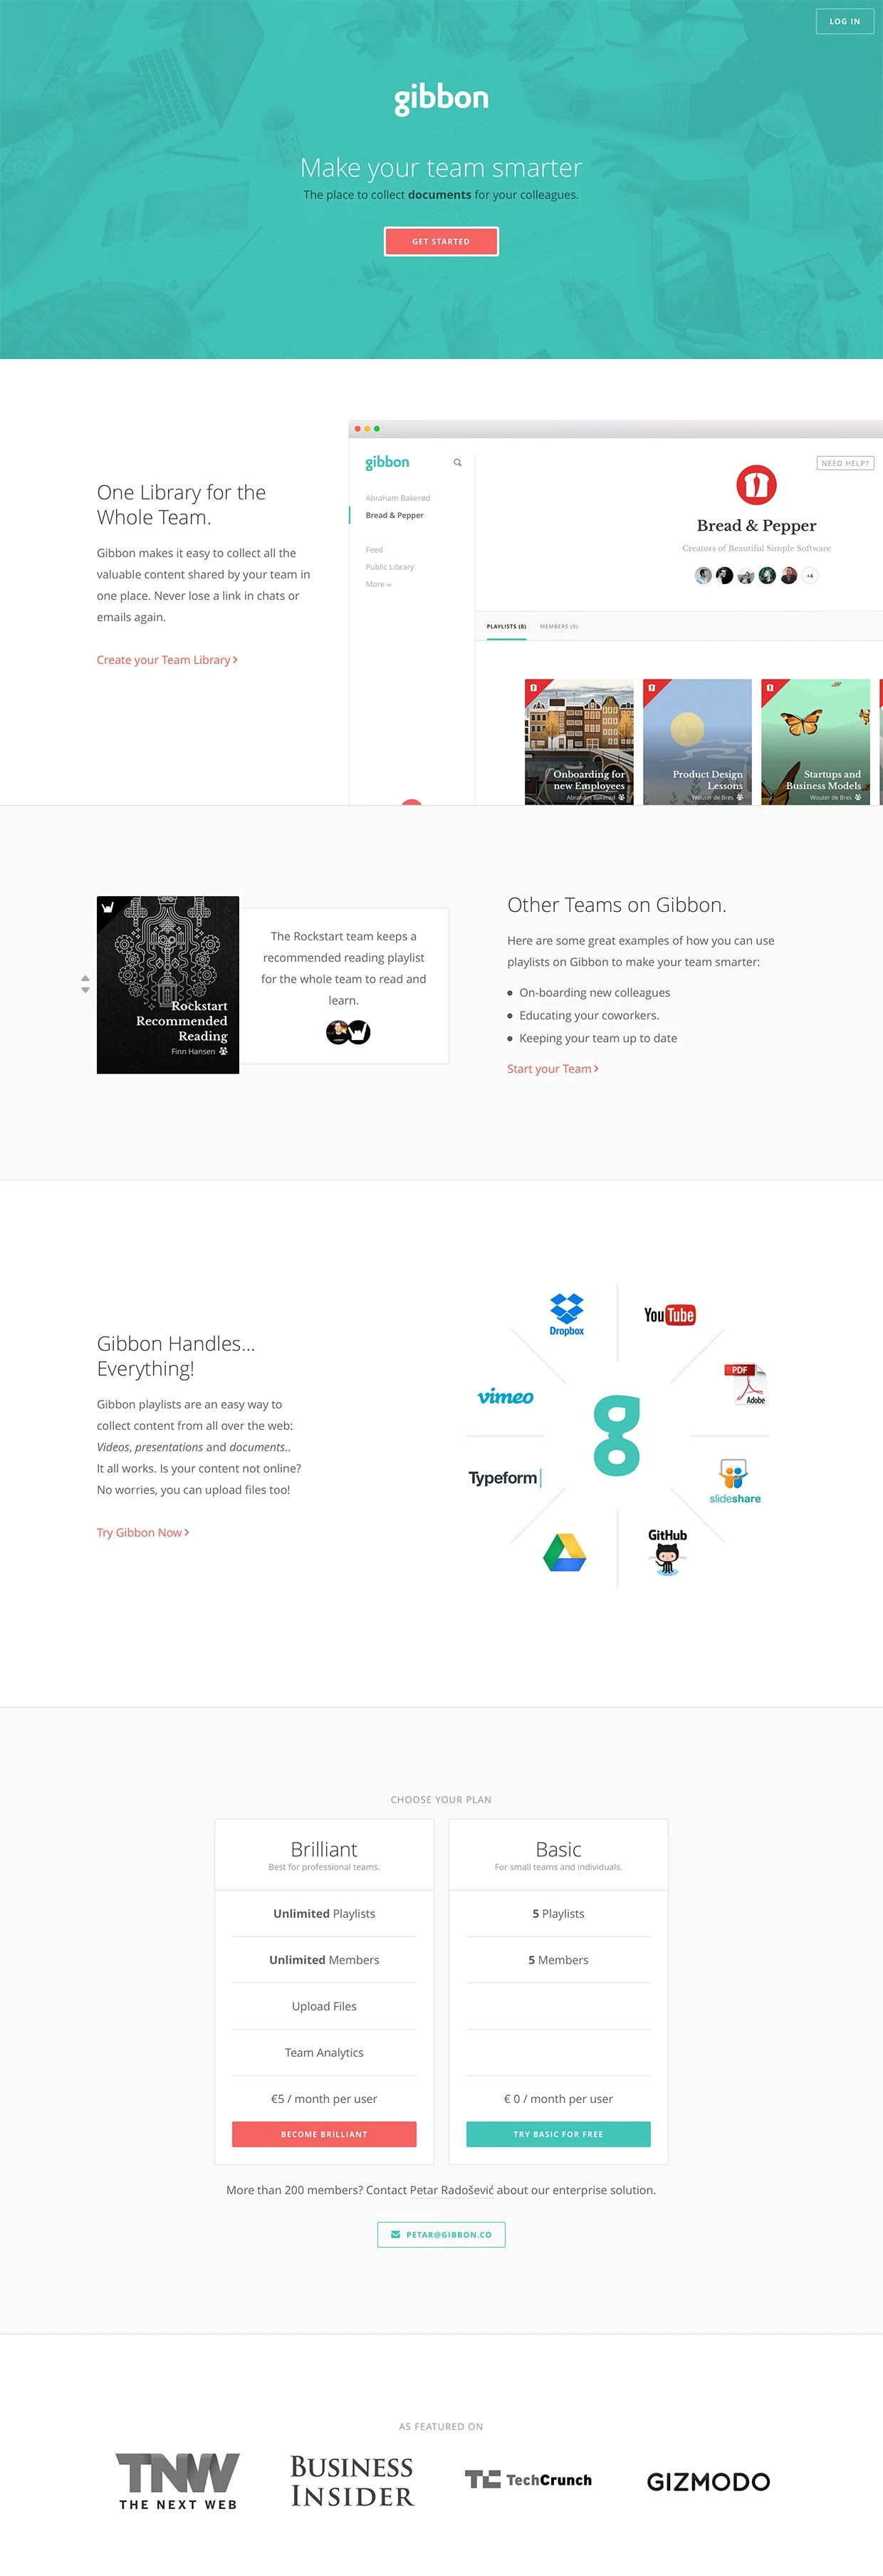 Gibbon Landing Page Example:  Use Gibbon to collect and share knowledge with your team or the whole world.